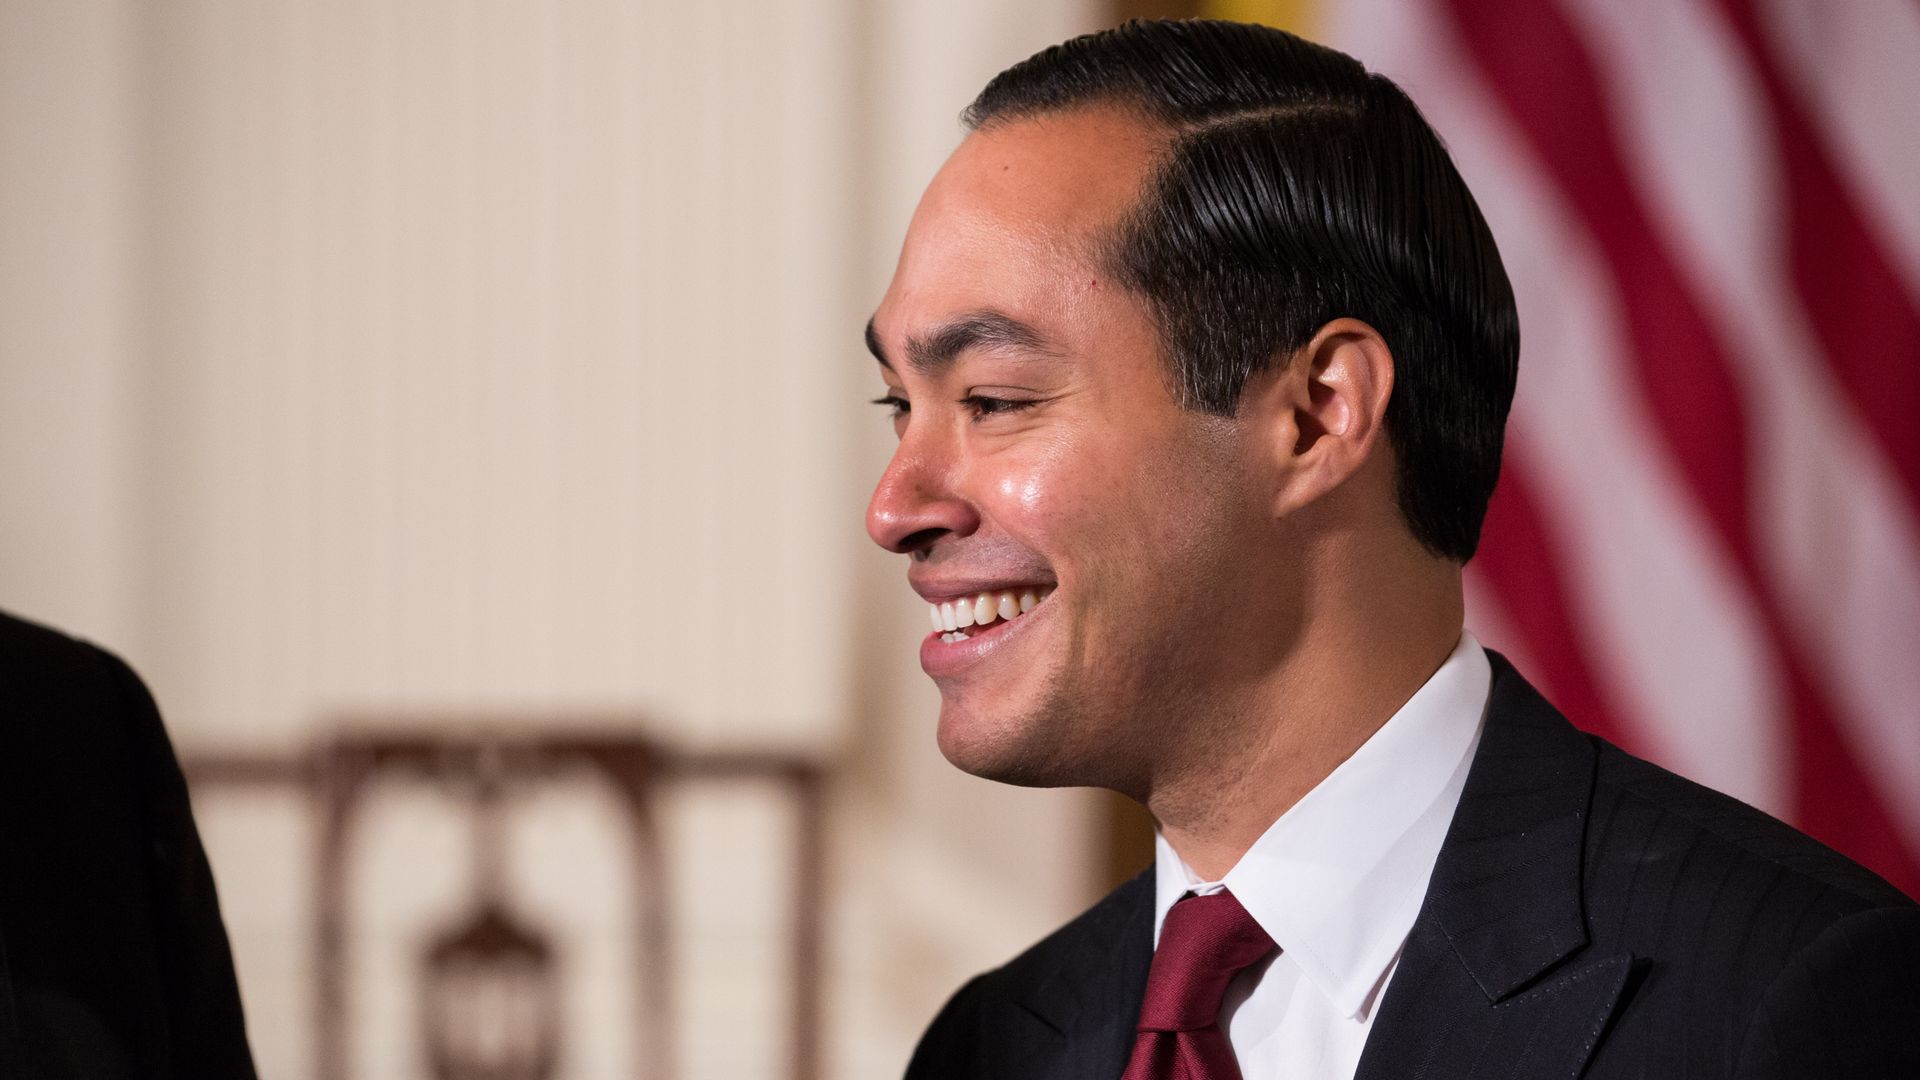 Julian Castro smiling on stage with suit and tie. 